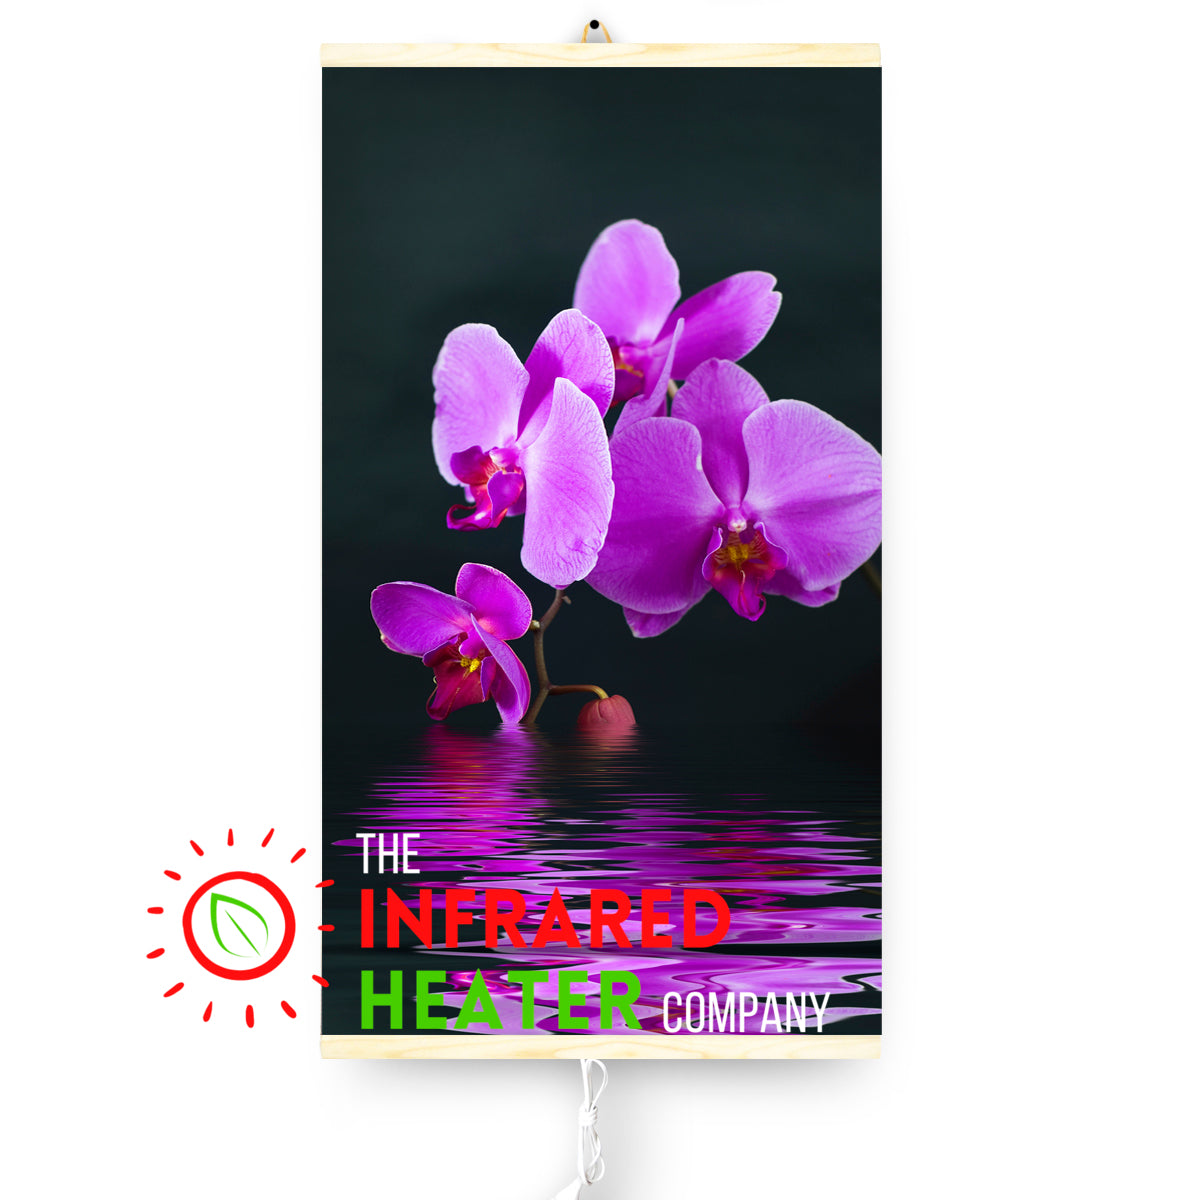 Infrared Wall mounted  Picture Heater. Far Infrared Heating Panel 420W "Violet Mood"